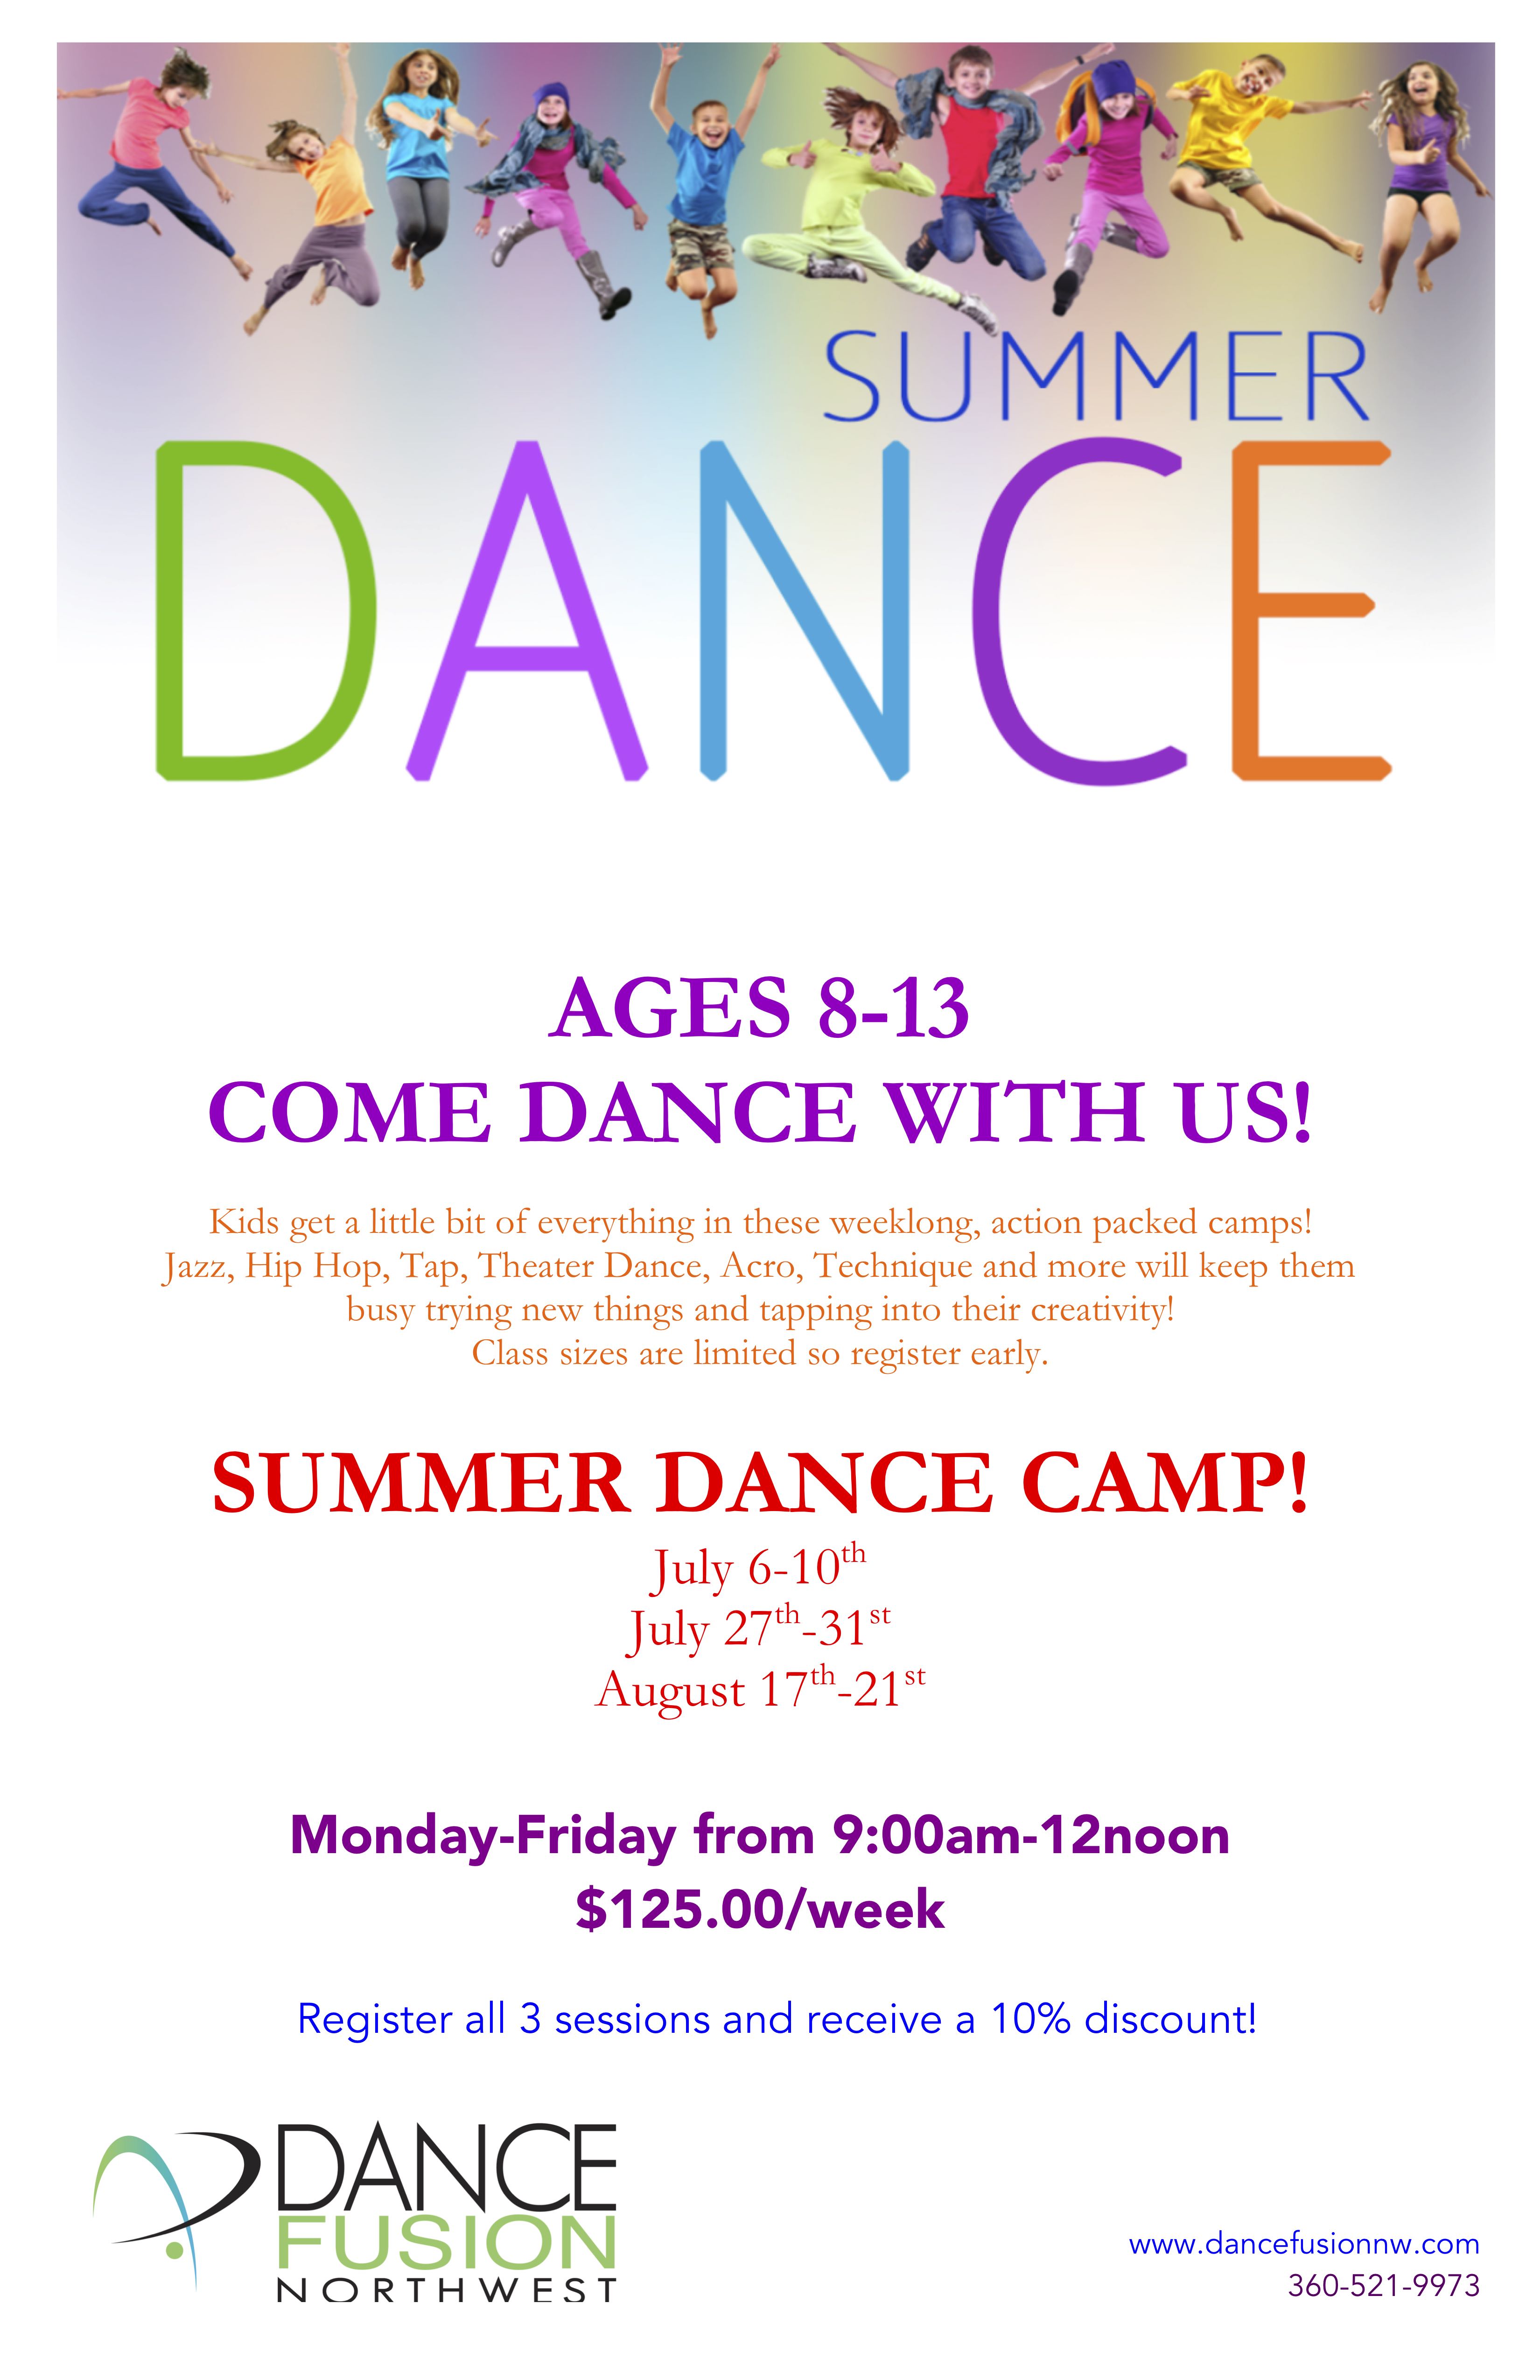 2020 SUMMER CAMP AGES 8-13 poster - Dance Fusion NW Dance Studio